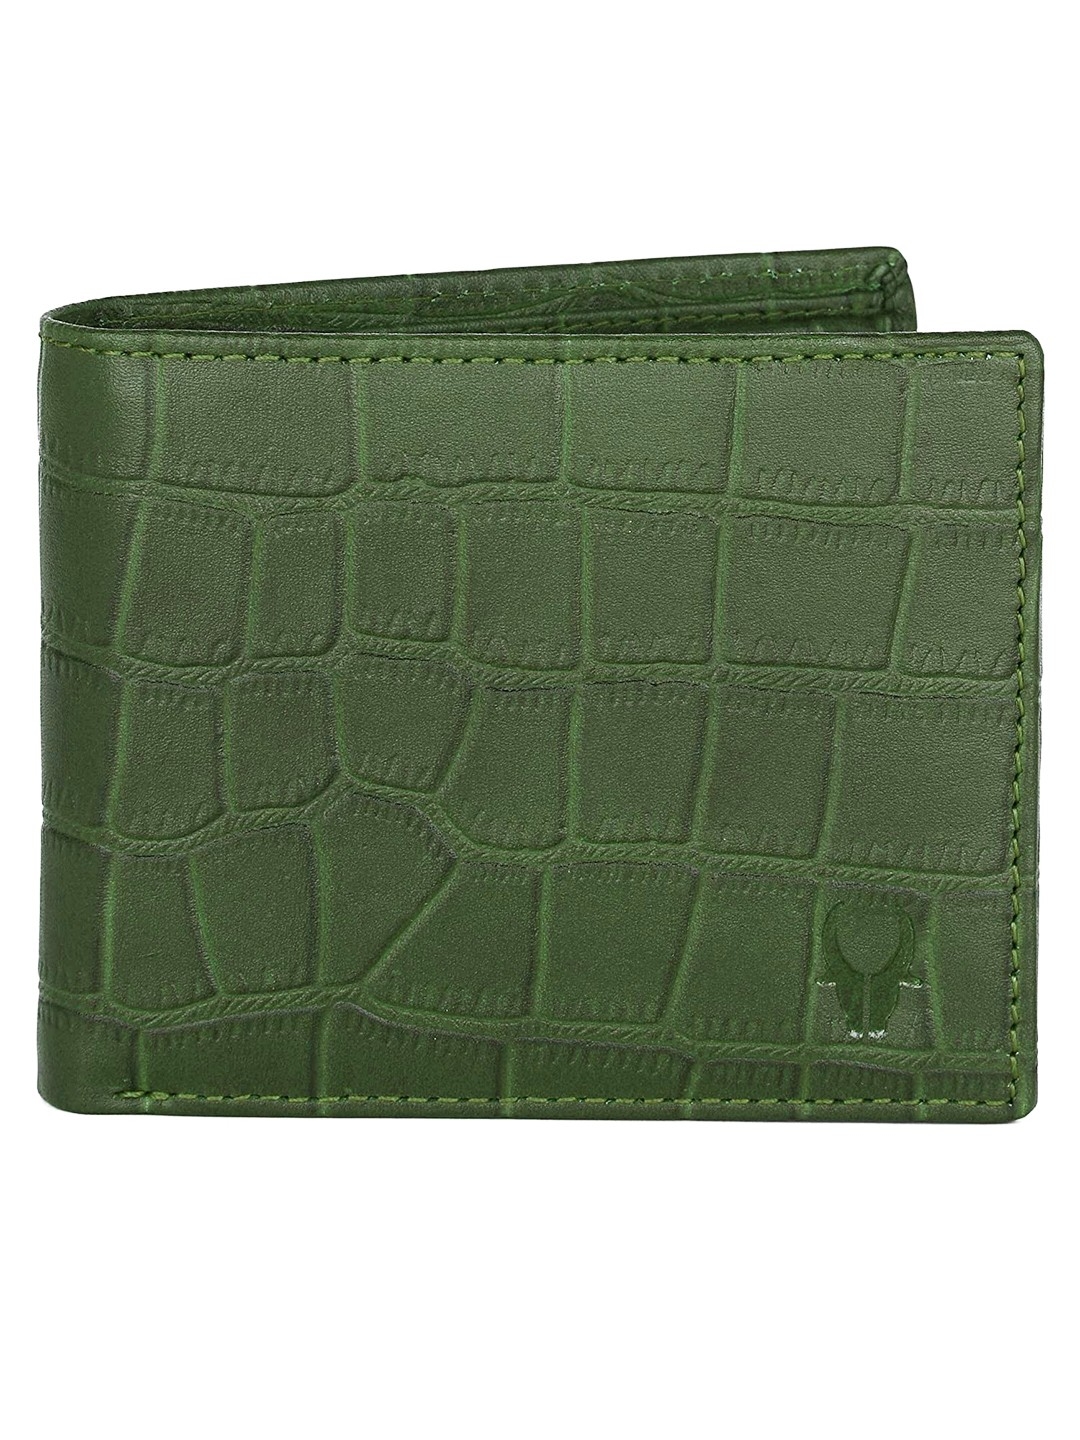 WildHorn | WildHorn RFID Protected Genuine High Quality Leather Green Wallet for Men